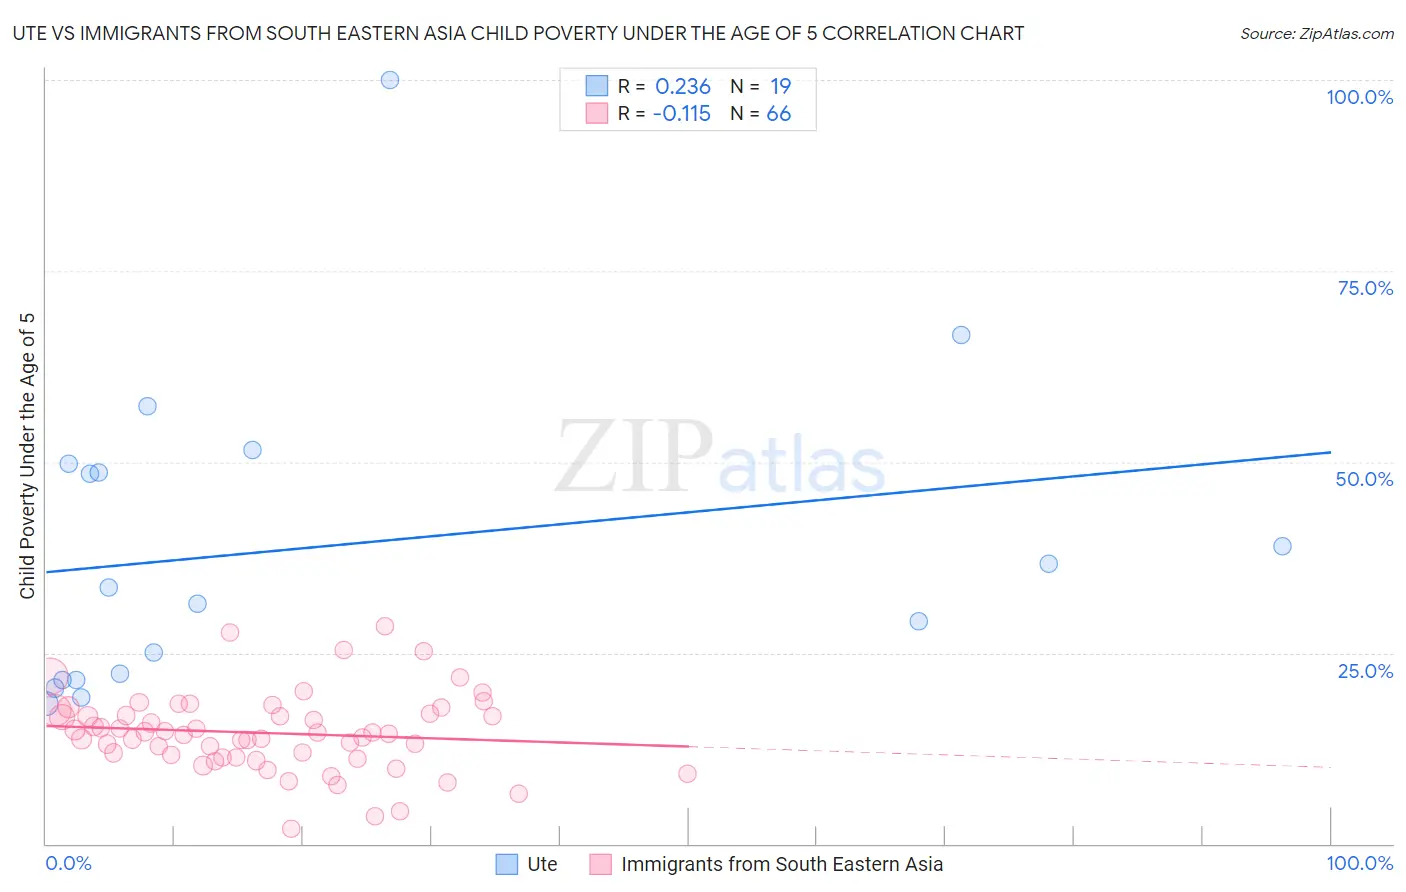 Ute vs Immigrants from South Eastern Asia Child Poverty Under the Age of 5